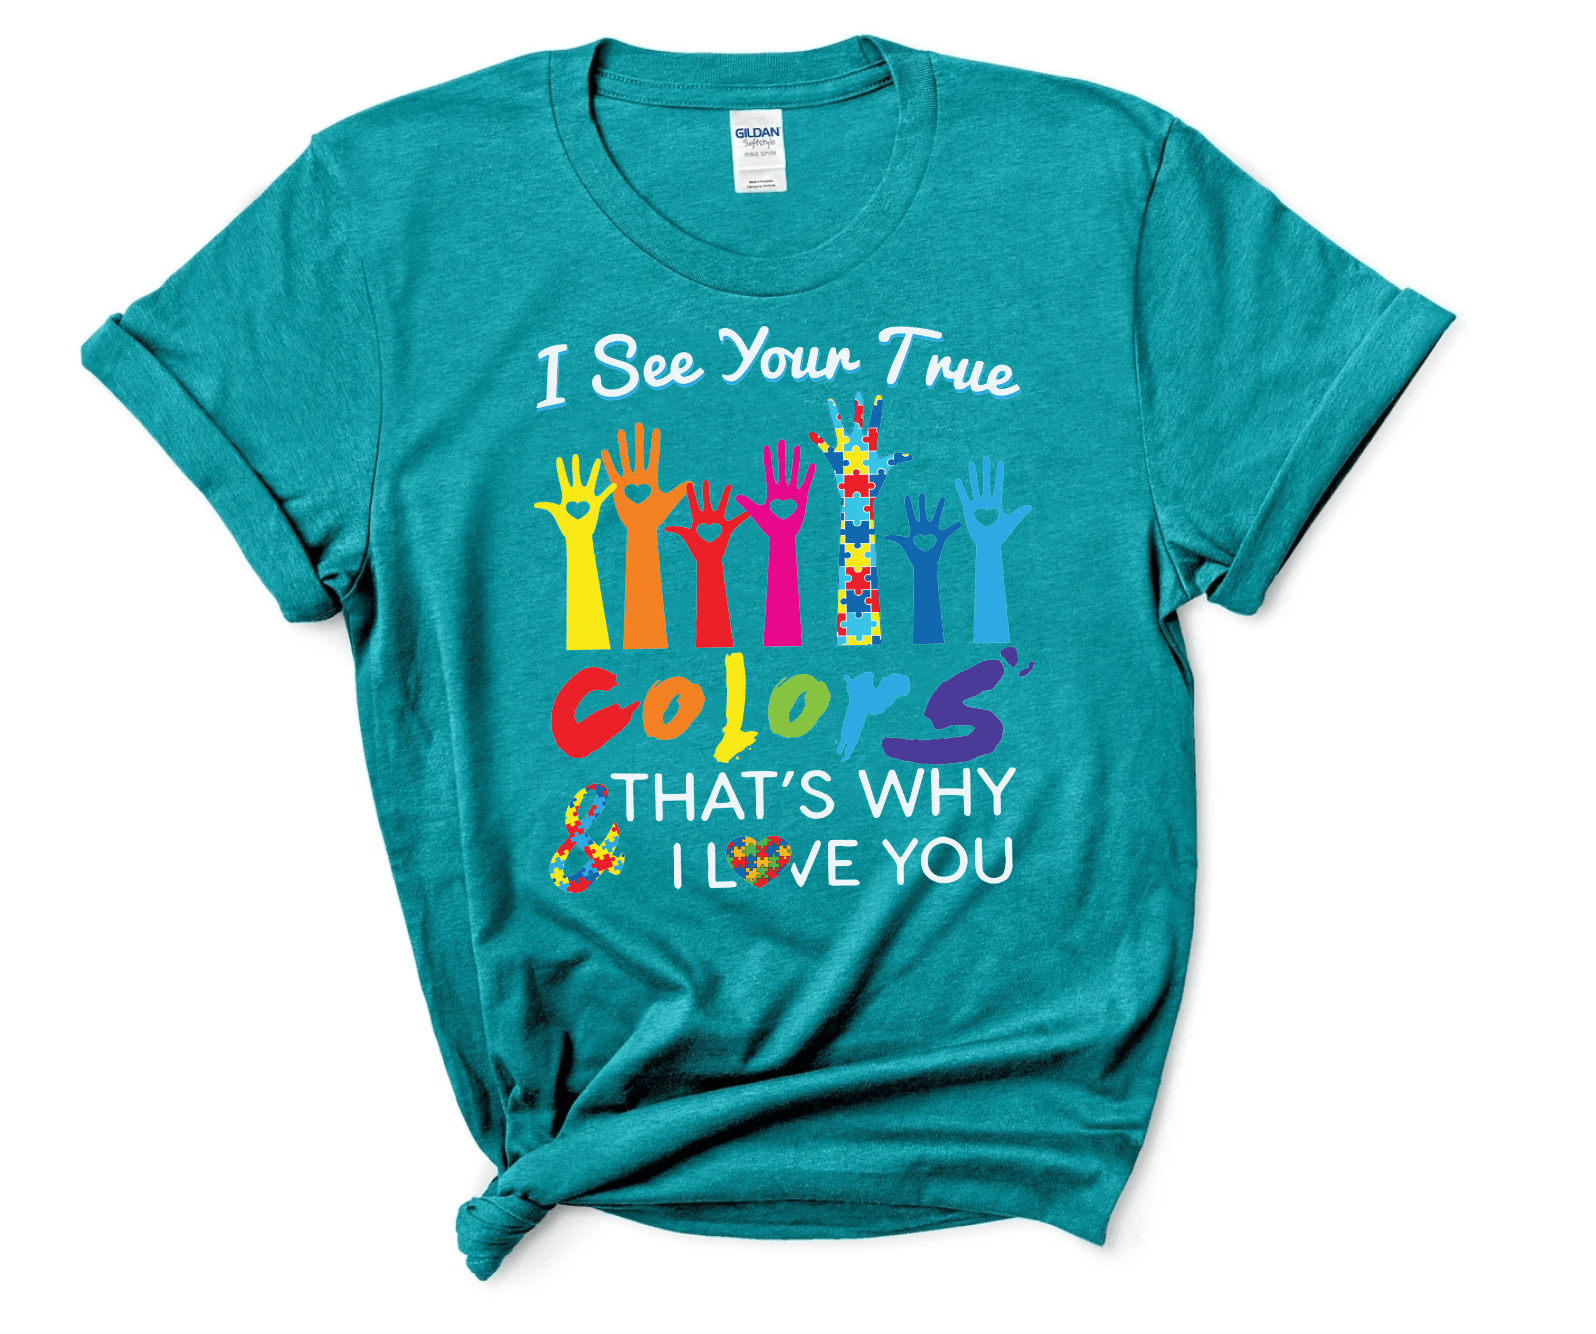 I See your True Colors and thats why i love you - Signastyle Boutique